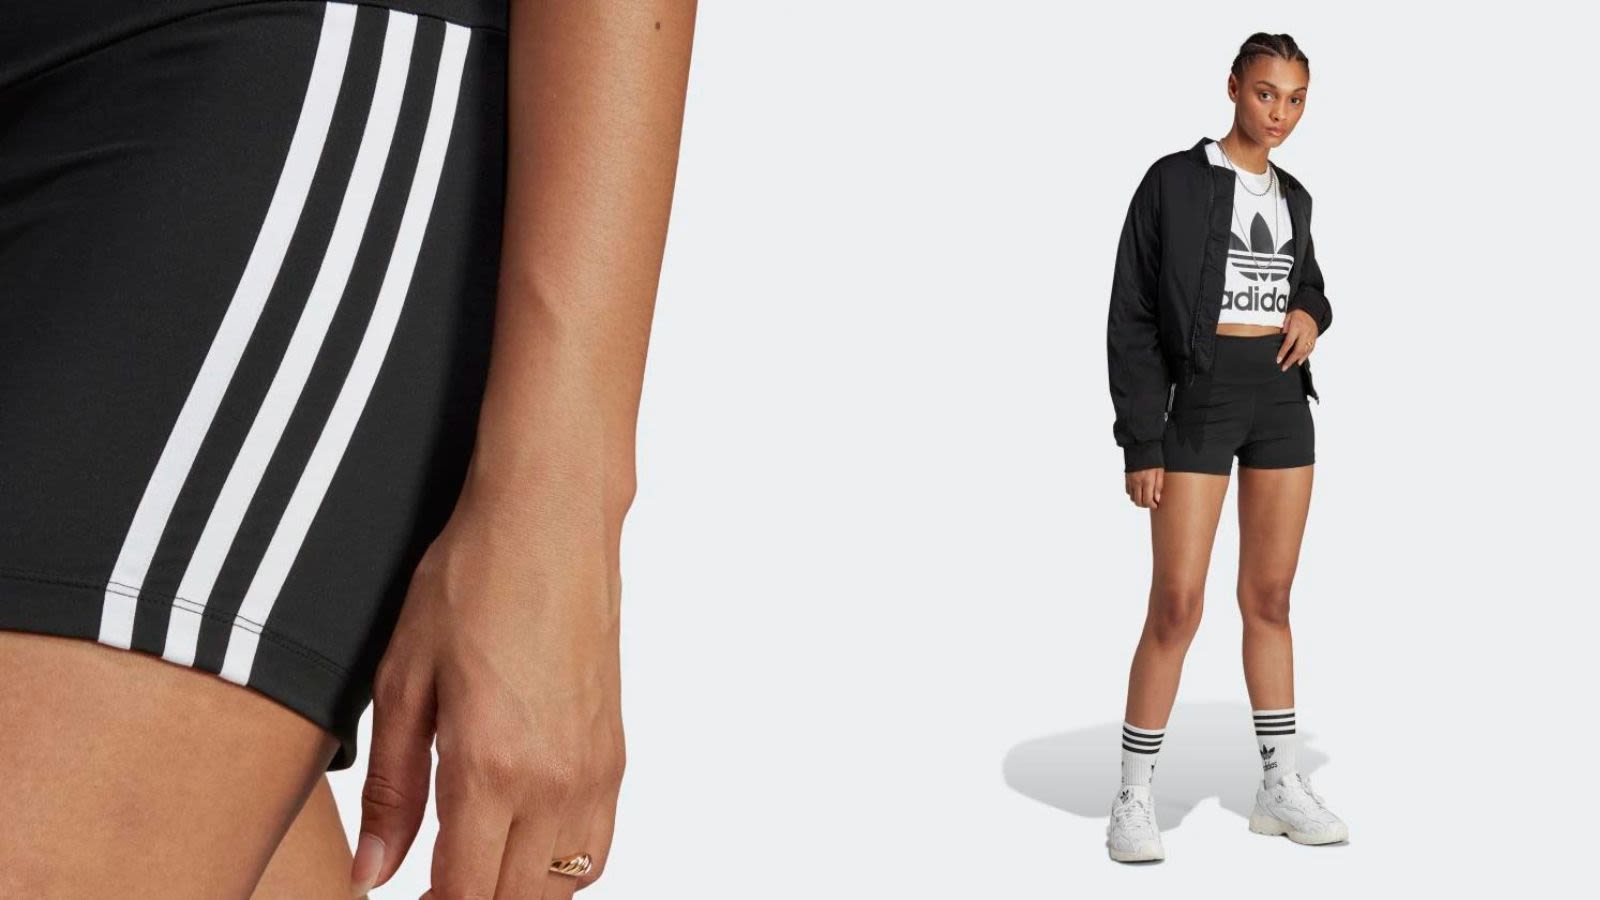 What's Trending on X: @Adidas is the tits, literally. The brand